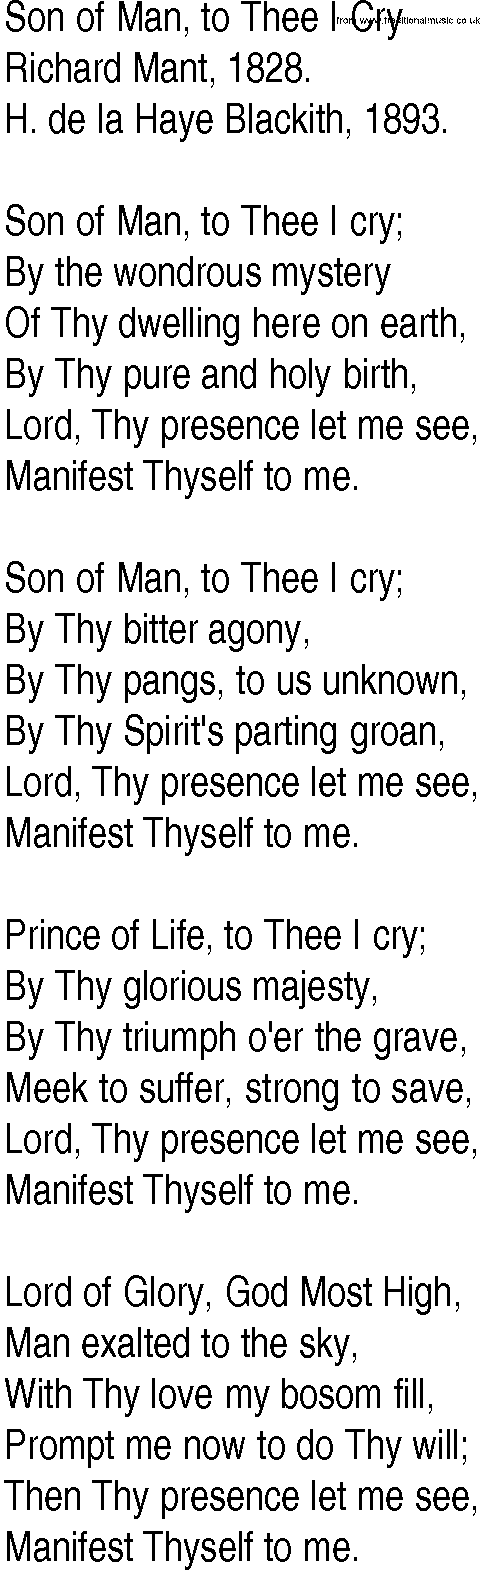 Hymn and Gospel Song: Son of Man, to Thee I Cry by Richard Mant lyrics